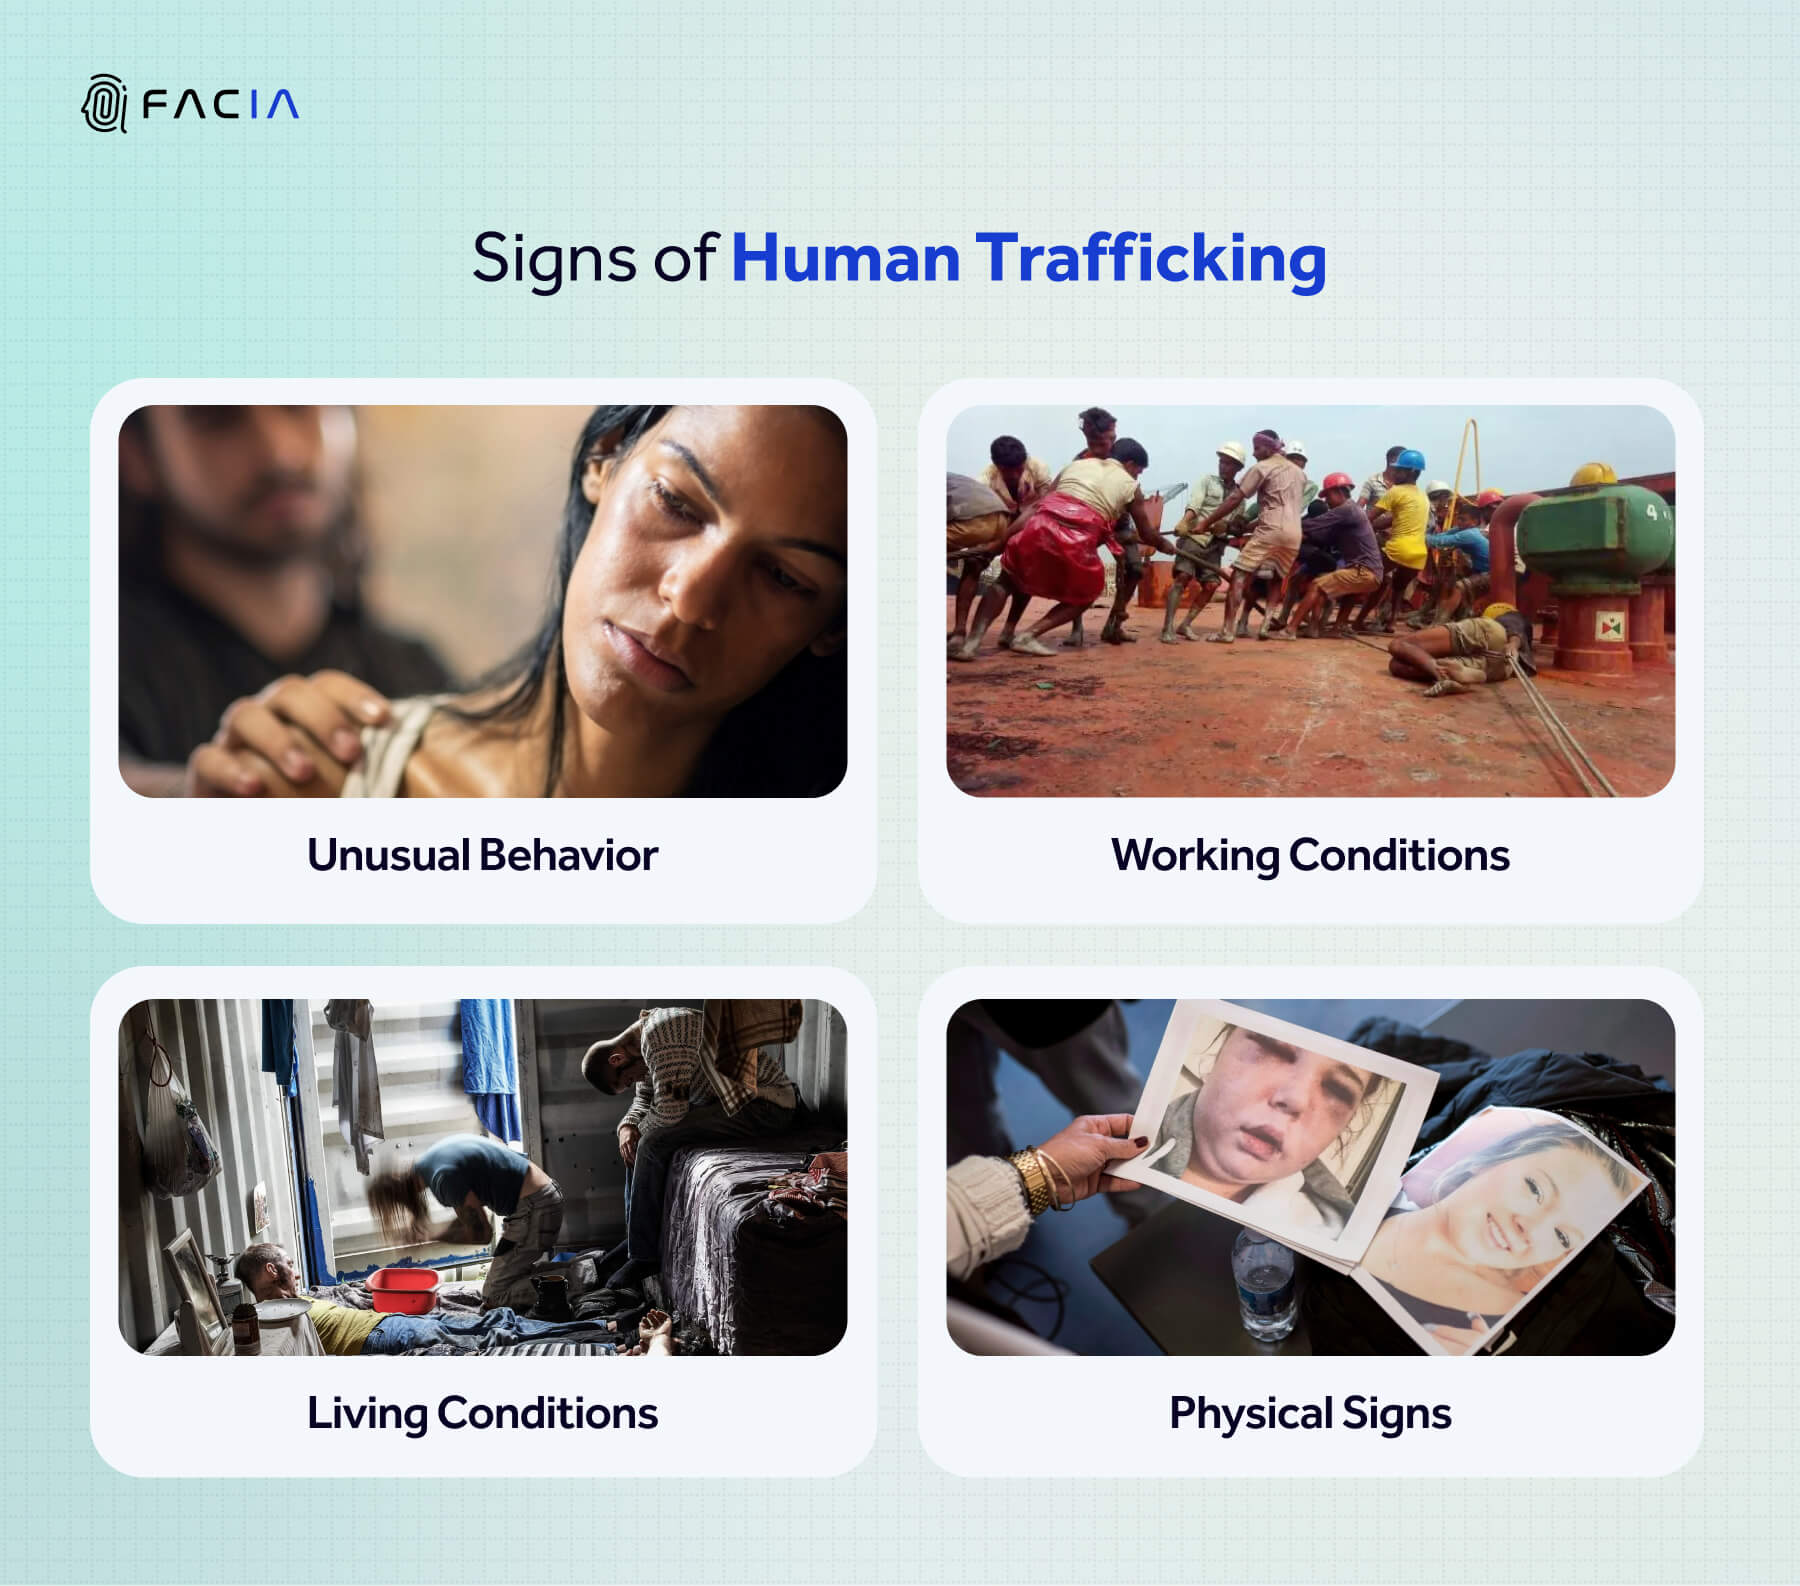 Human Trafficking victims depict certain specific signs such as 1) Unusual Behavior 2) Dire Working Conditions 3) Poor Living Conditions 4) Physical Abuse Signs